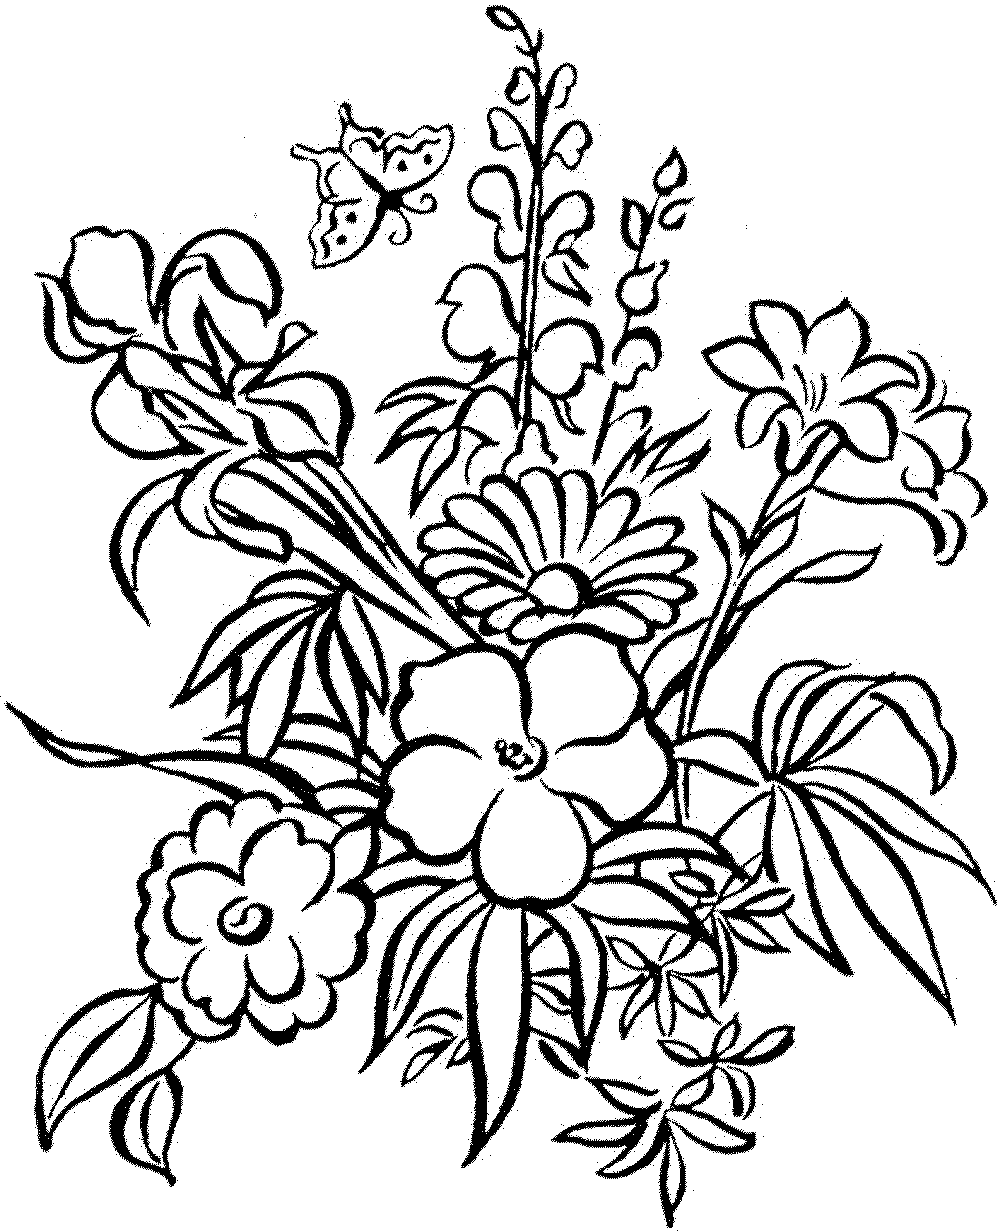 Print & Download   Some Common Variations of the Flower Coloring Pages